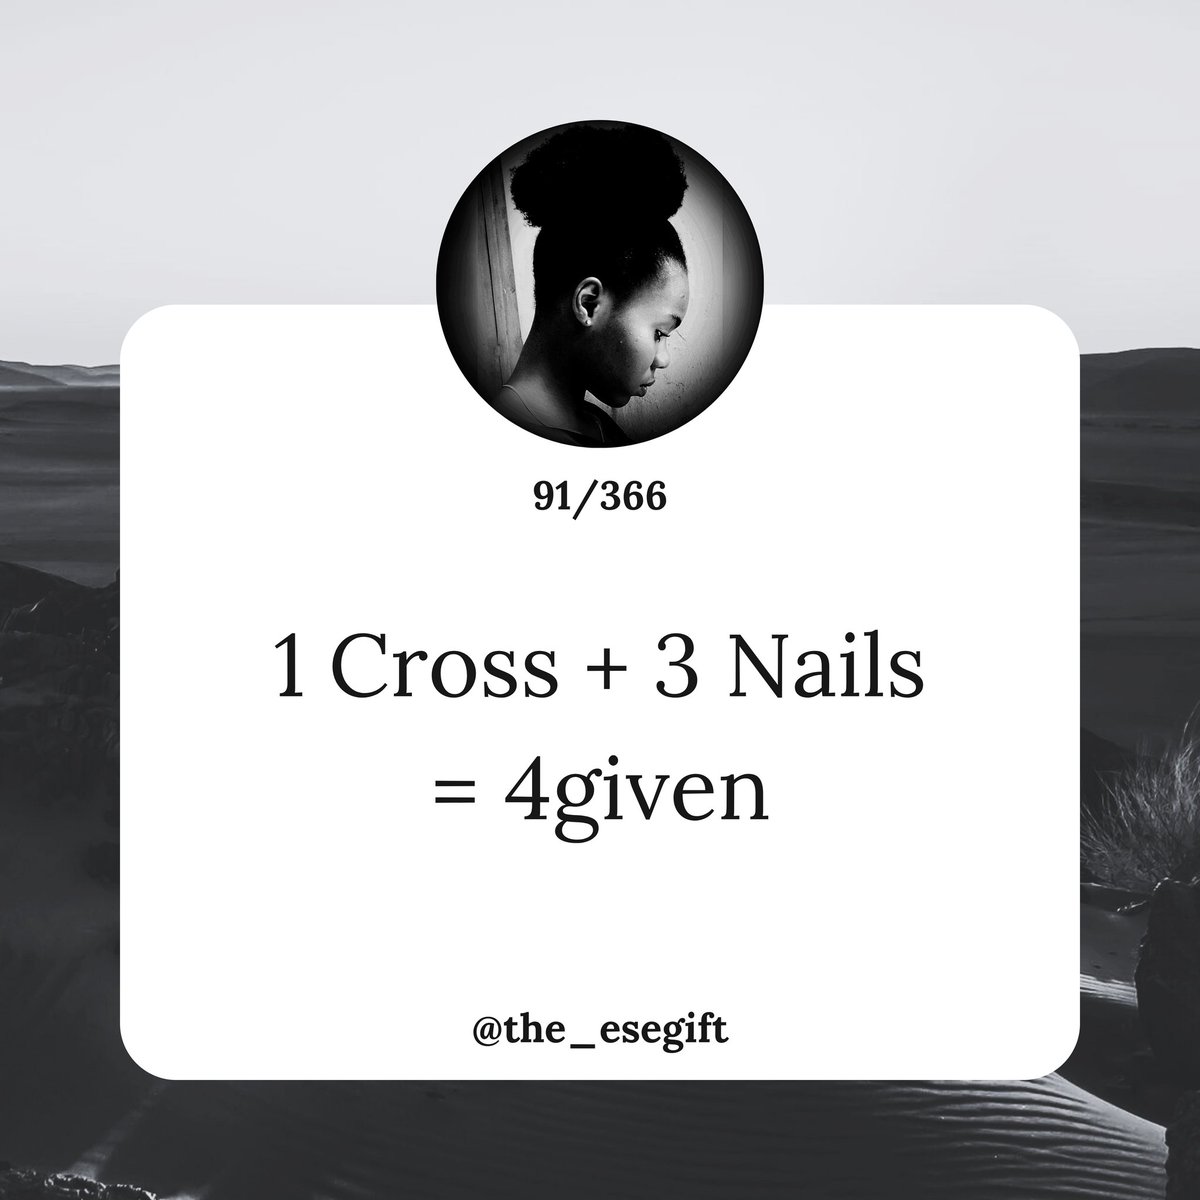 91/366
.
1 Cross + 3 Nails = 4given 
.
.
#Day91 #DailyMotivation #BeEncouraged #MediaGirl #ChurchGirl